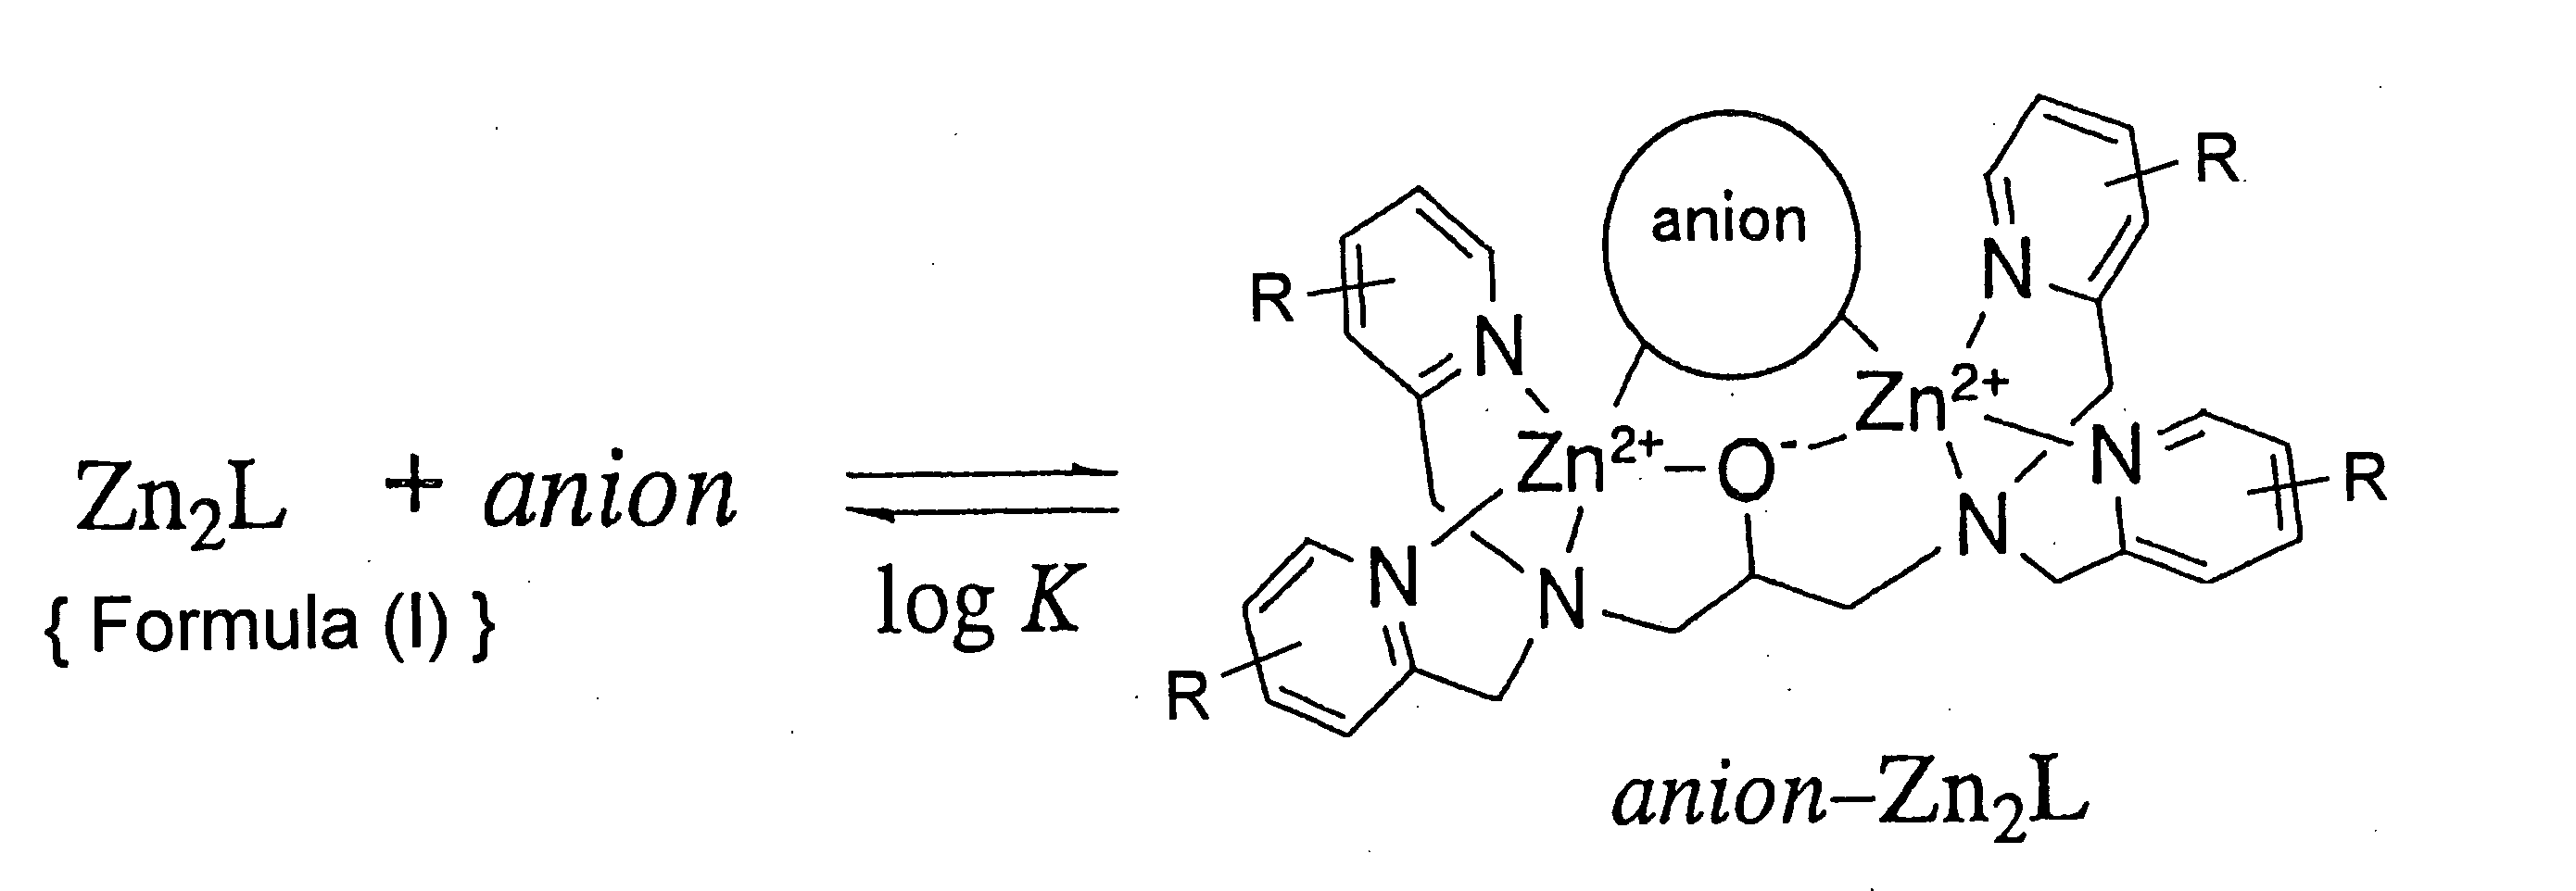 Zinc complexes capable of capturing substances having anionic substituents